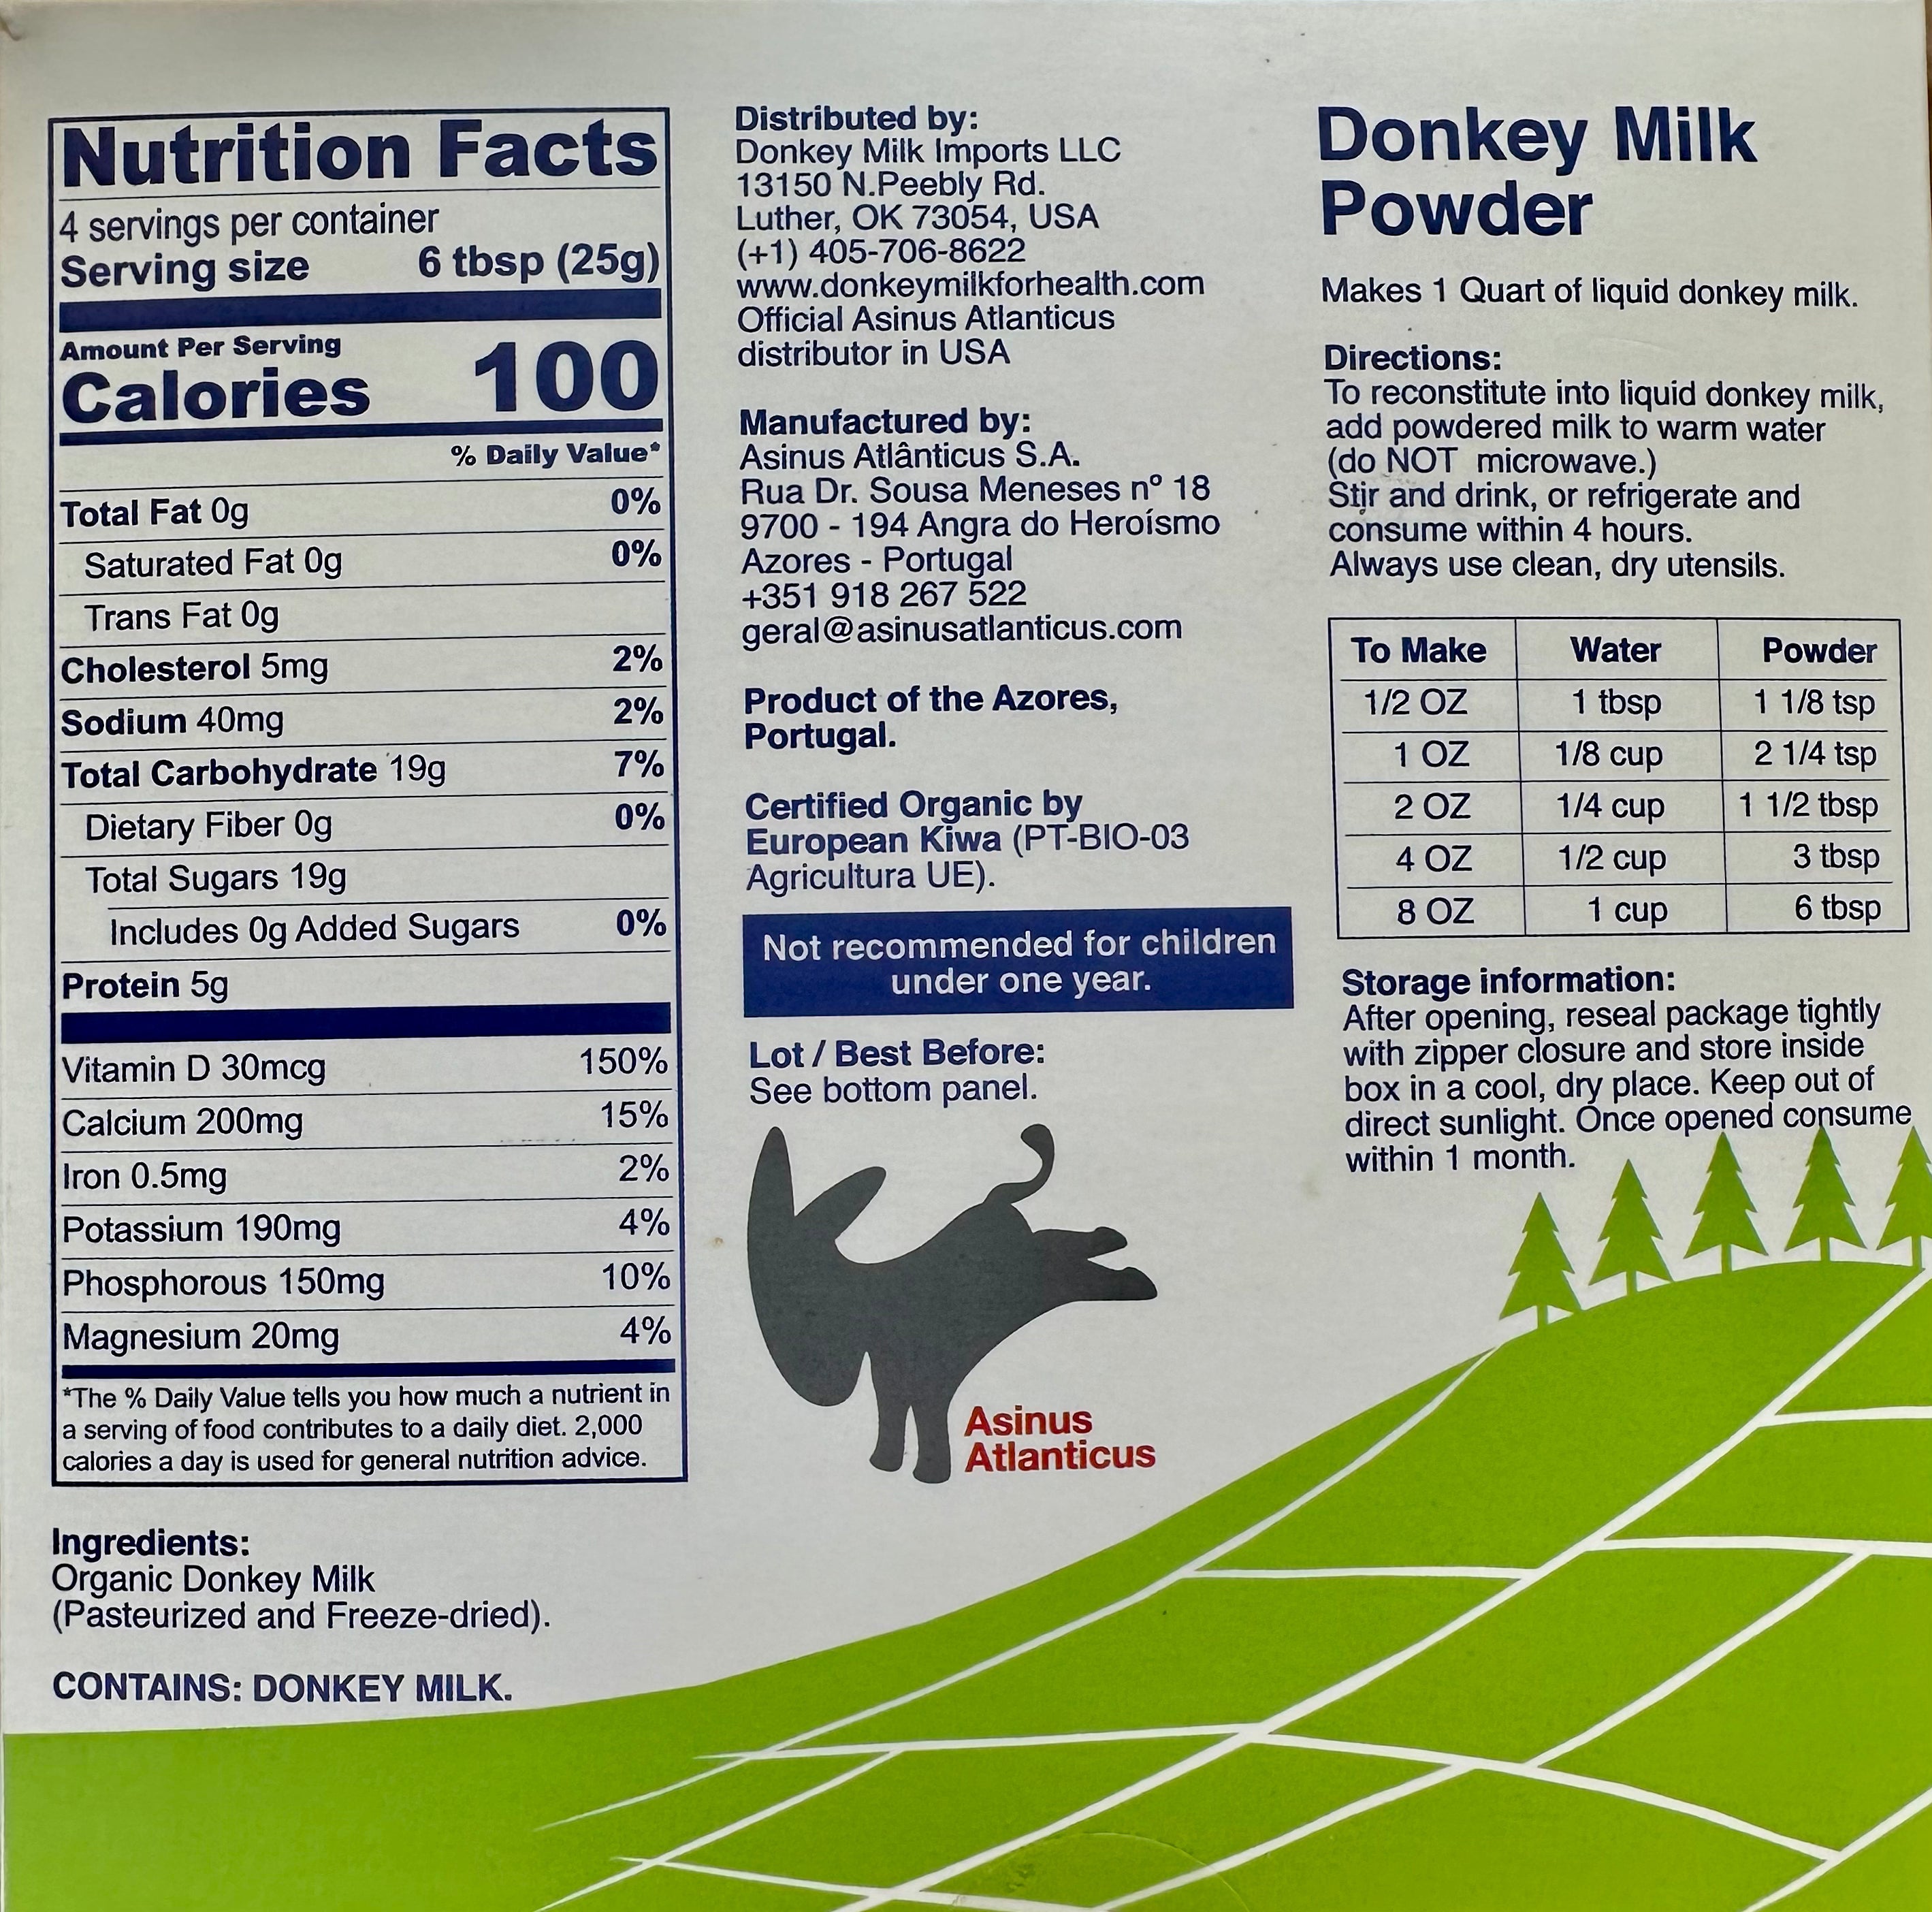 Pre-order for DECEMBER: WHEAT AND TREE NUT FREE SCAI Allergy Donkey Milk:  Cruelty free, USDA Organic from Azores Islands